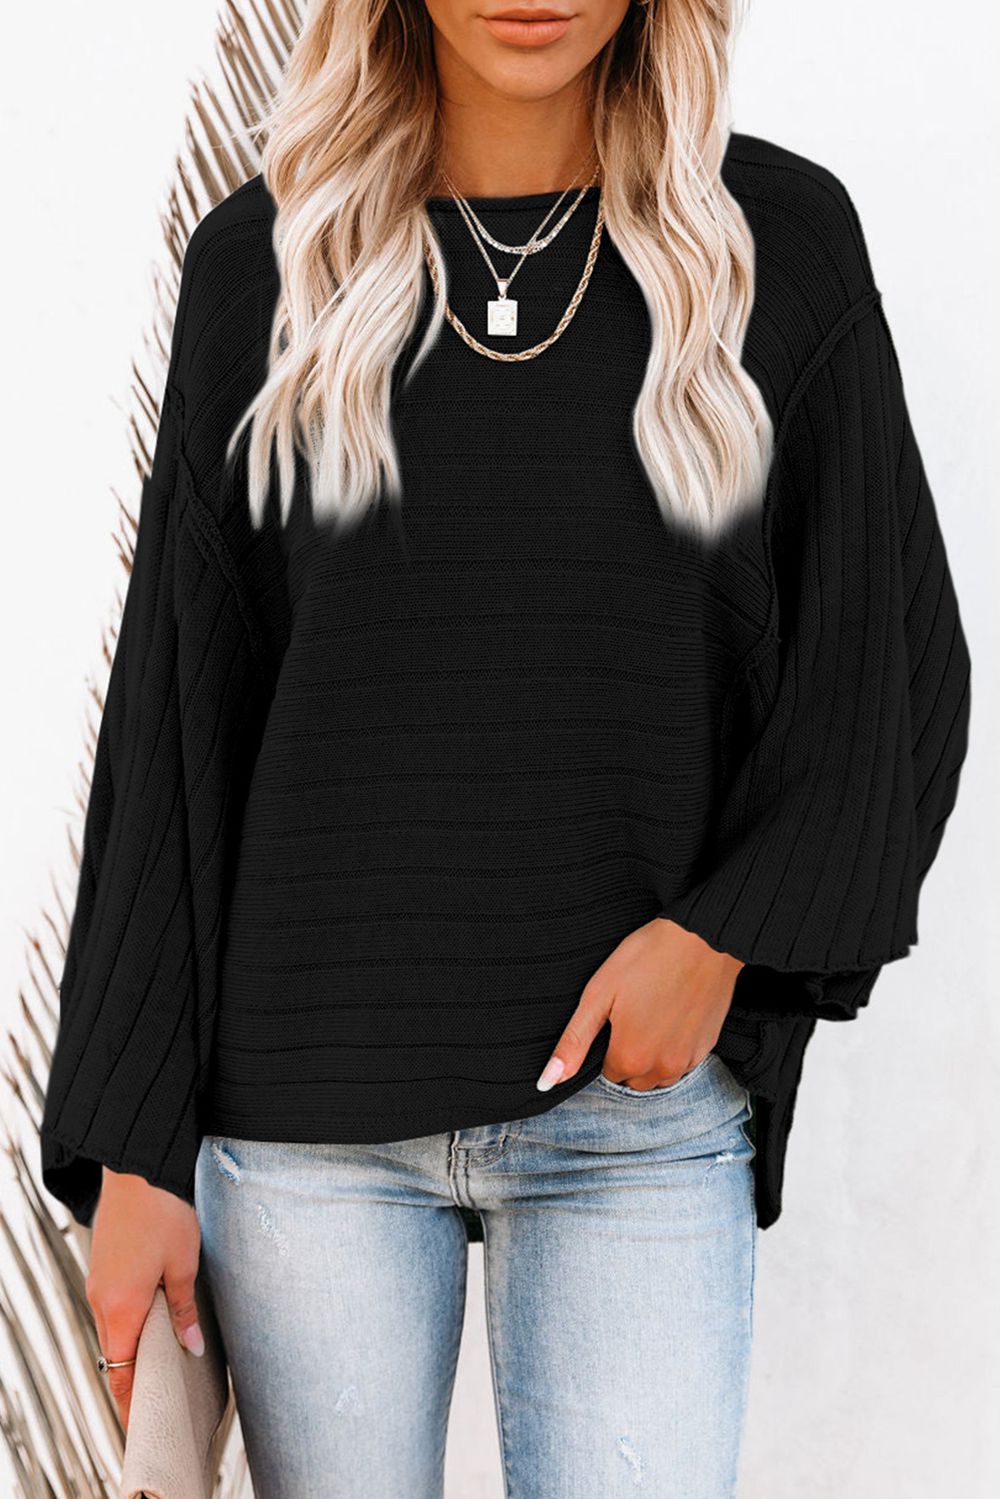 Runaway With Ribs Knit Top